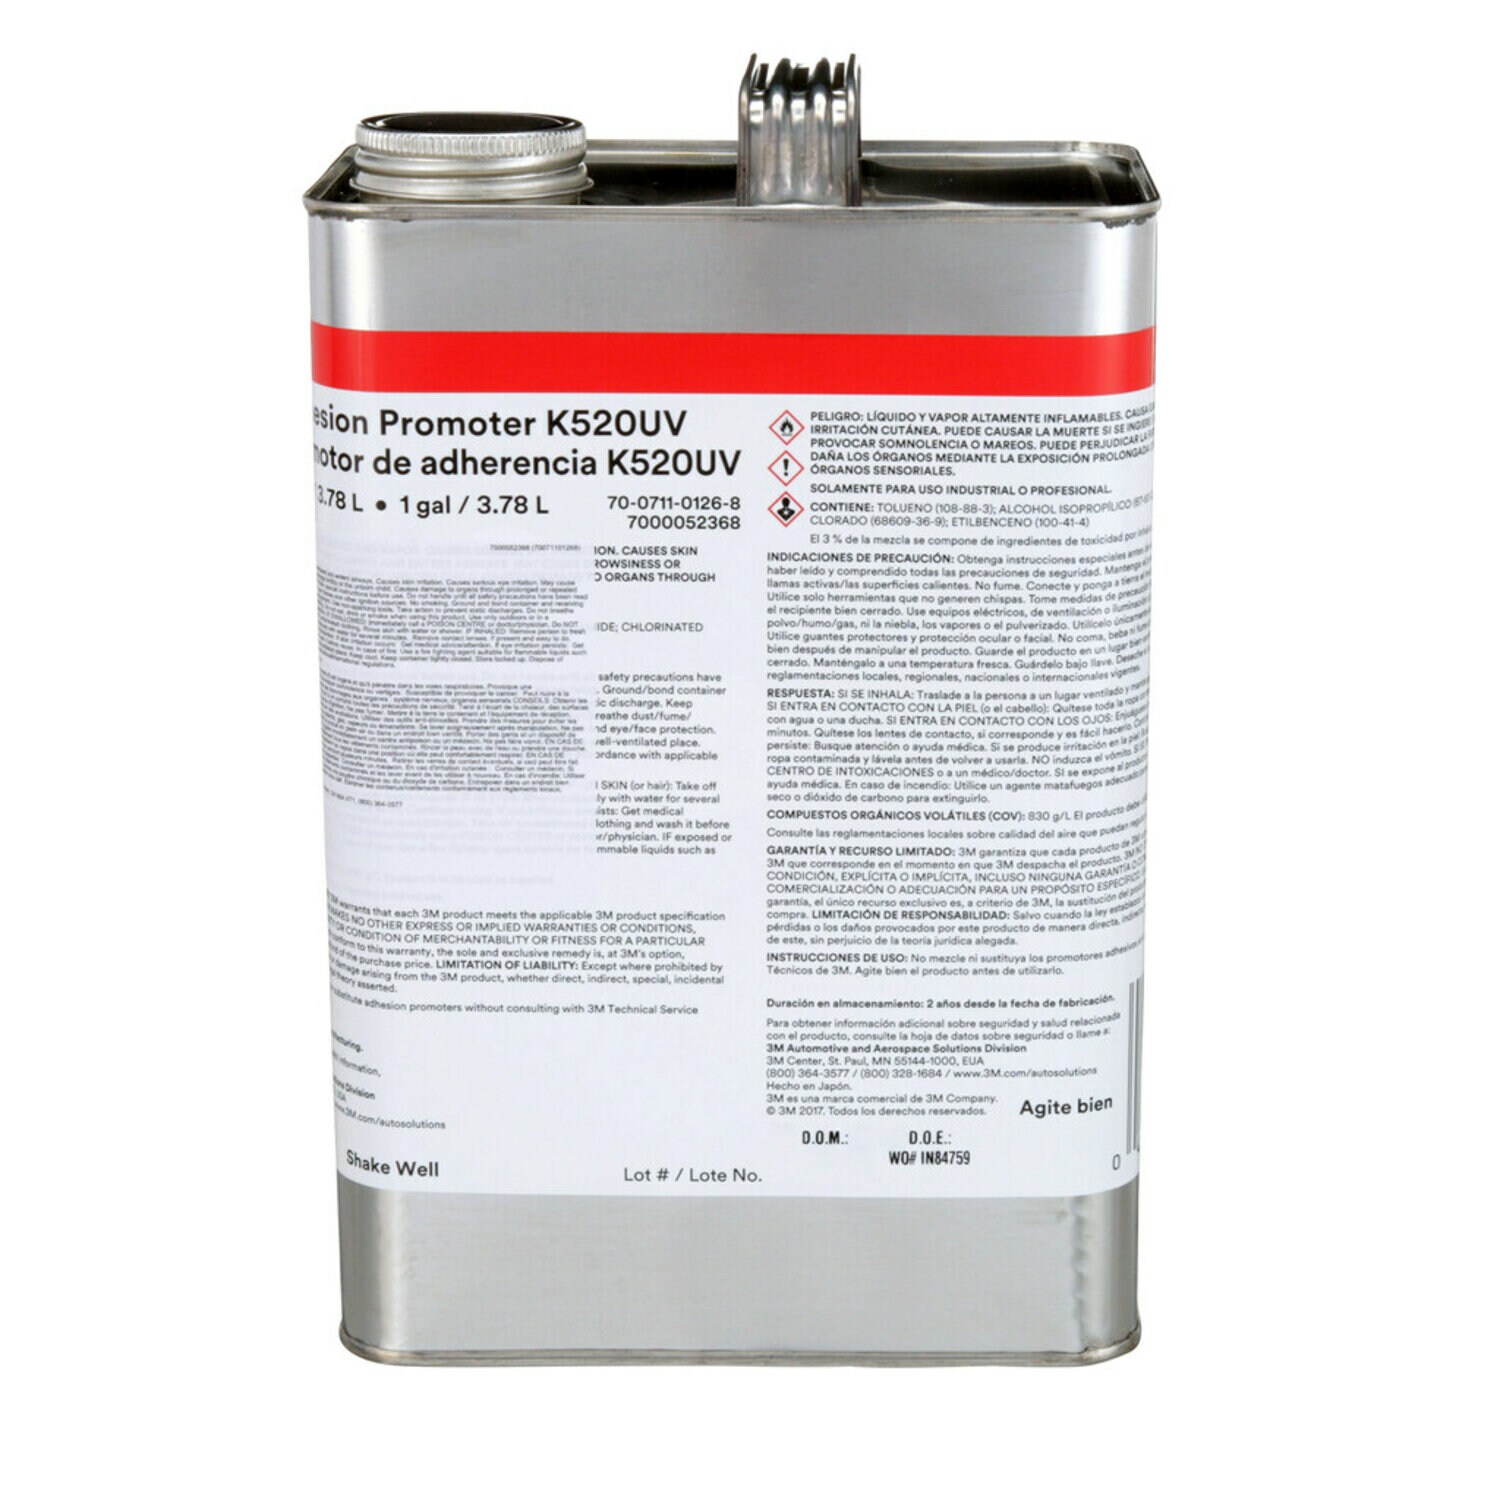 7000052368 - 3M Adhesion Promoter K520UV, 1 gal Can